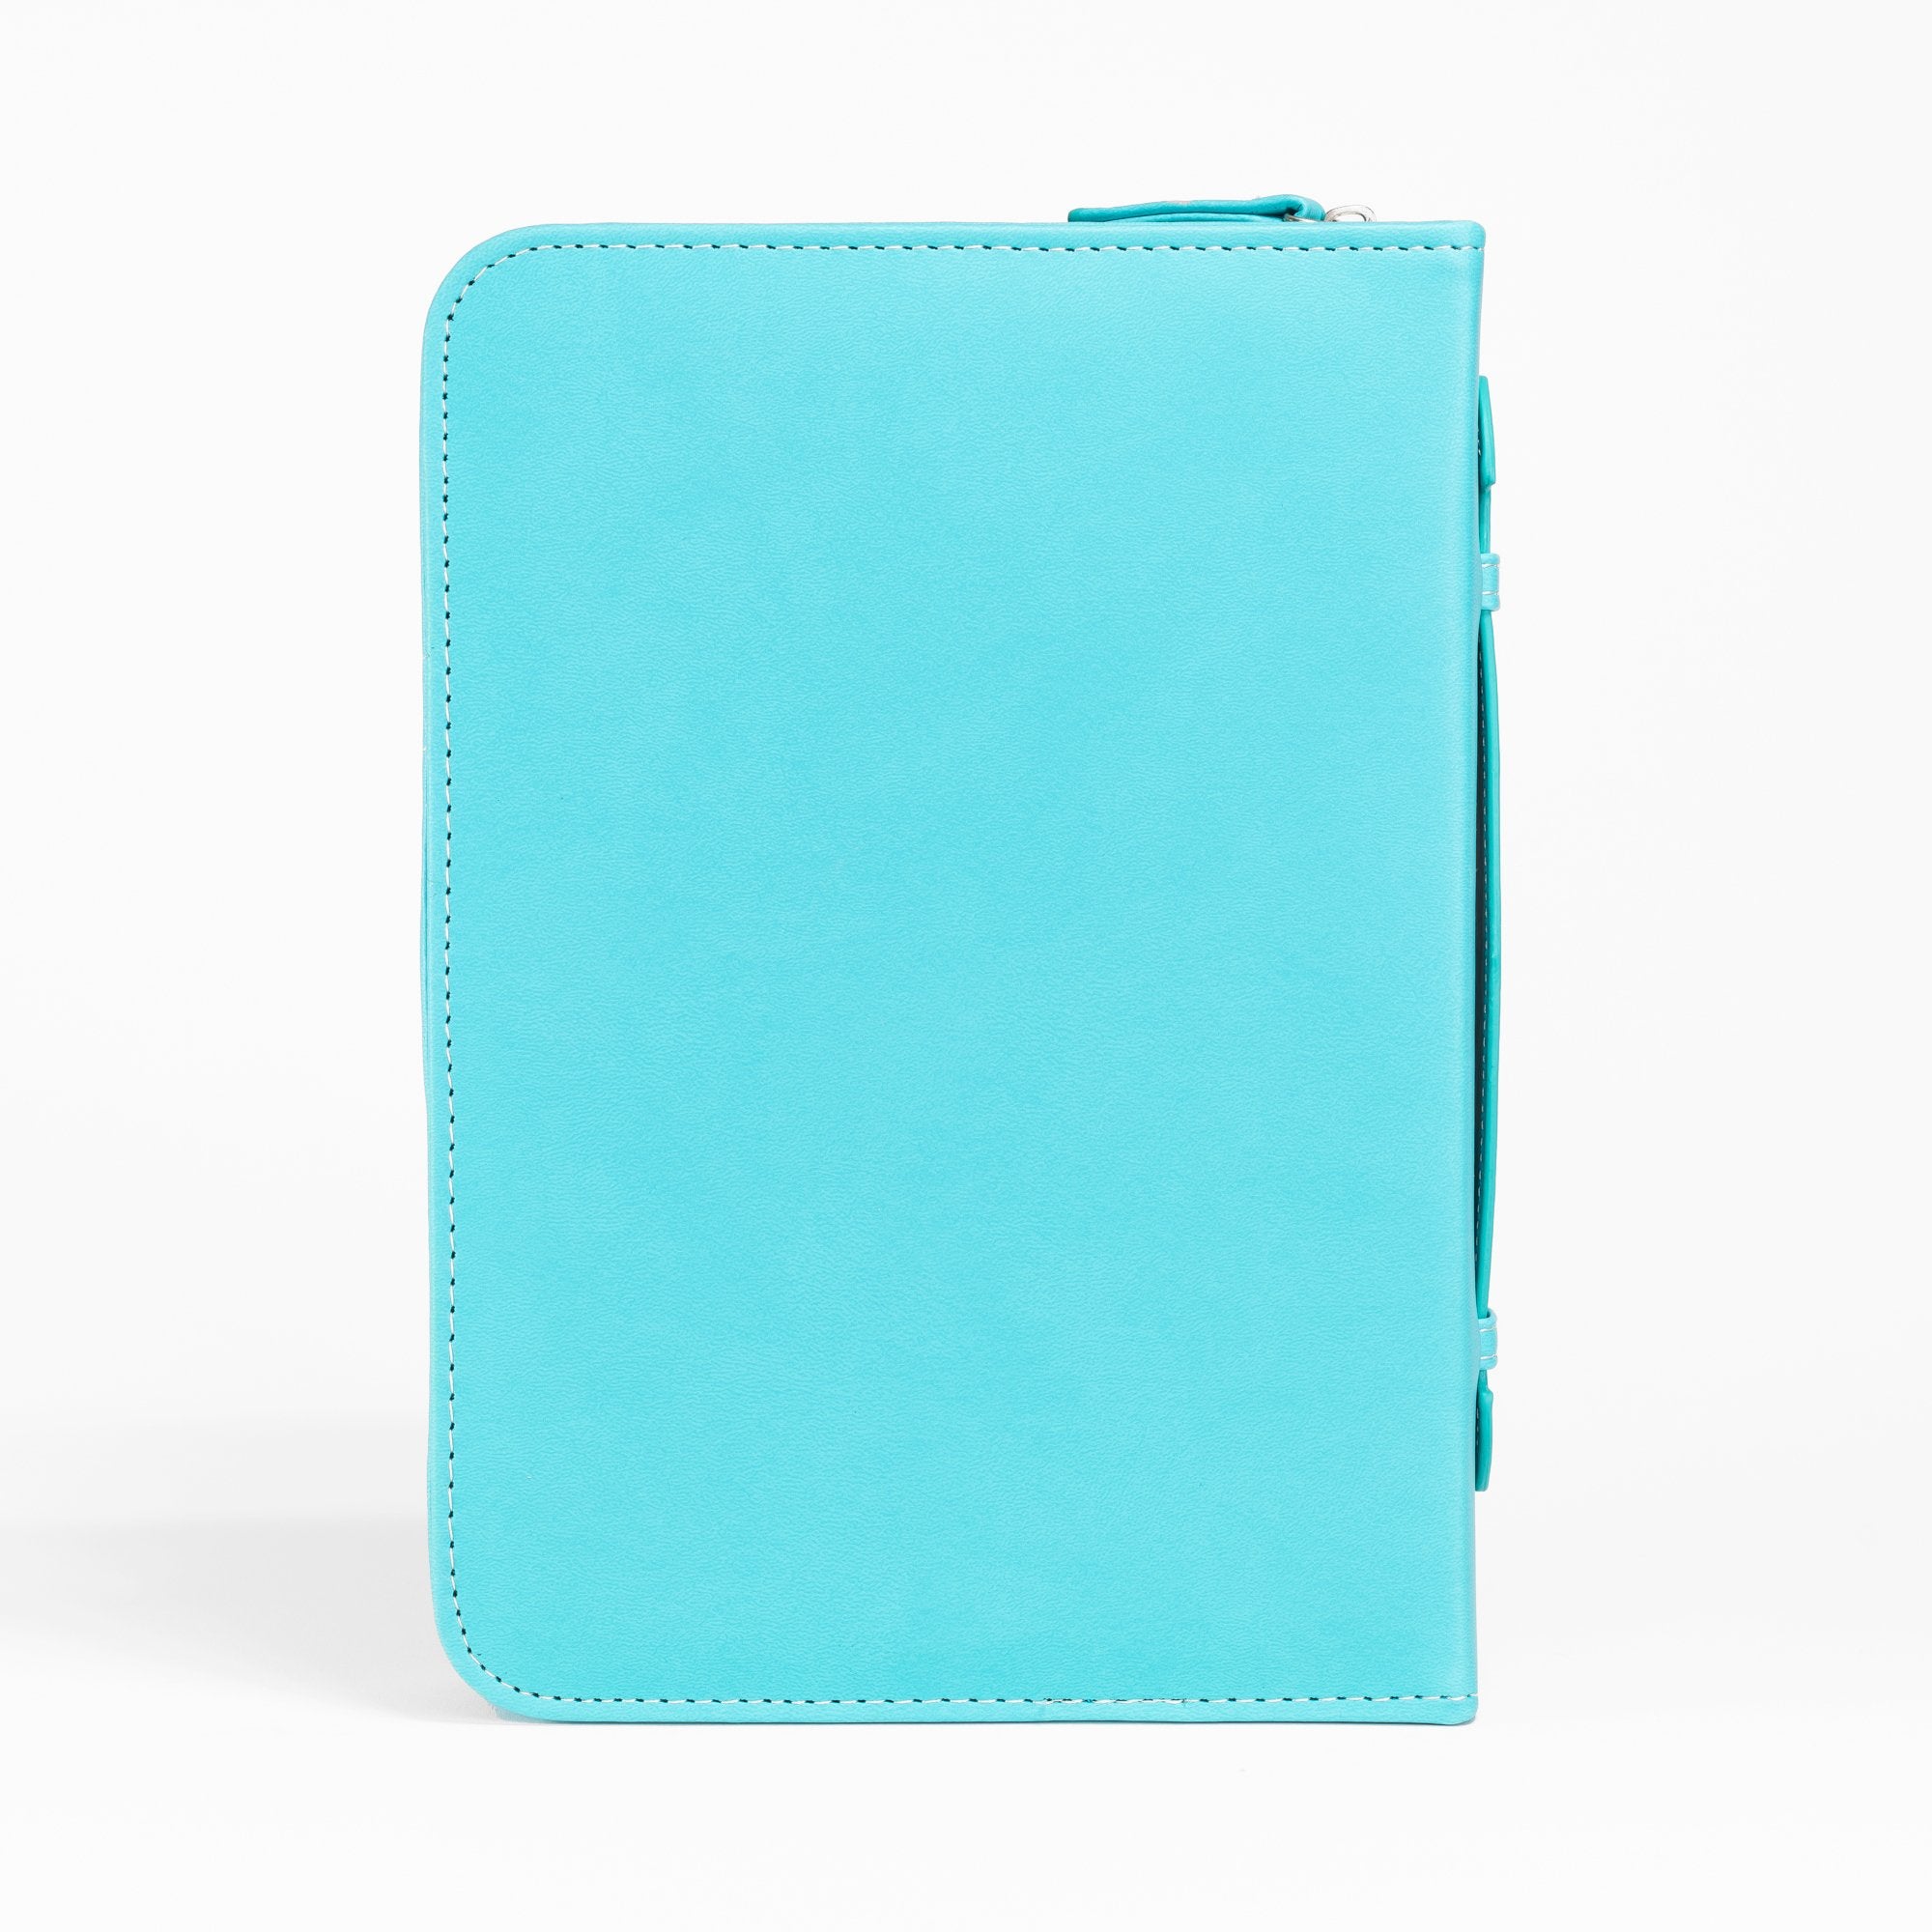 Divine Details: Bible Cover Teal - Behold I Make All Things New